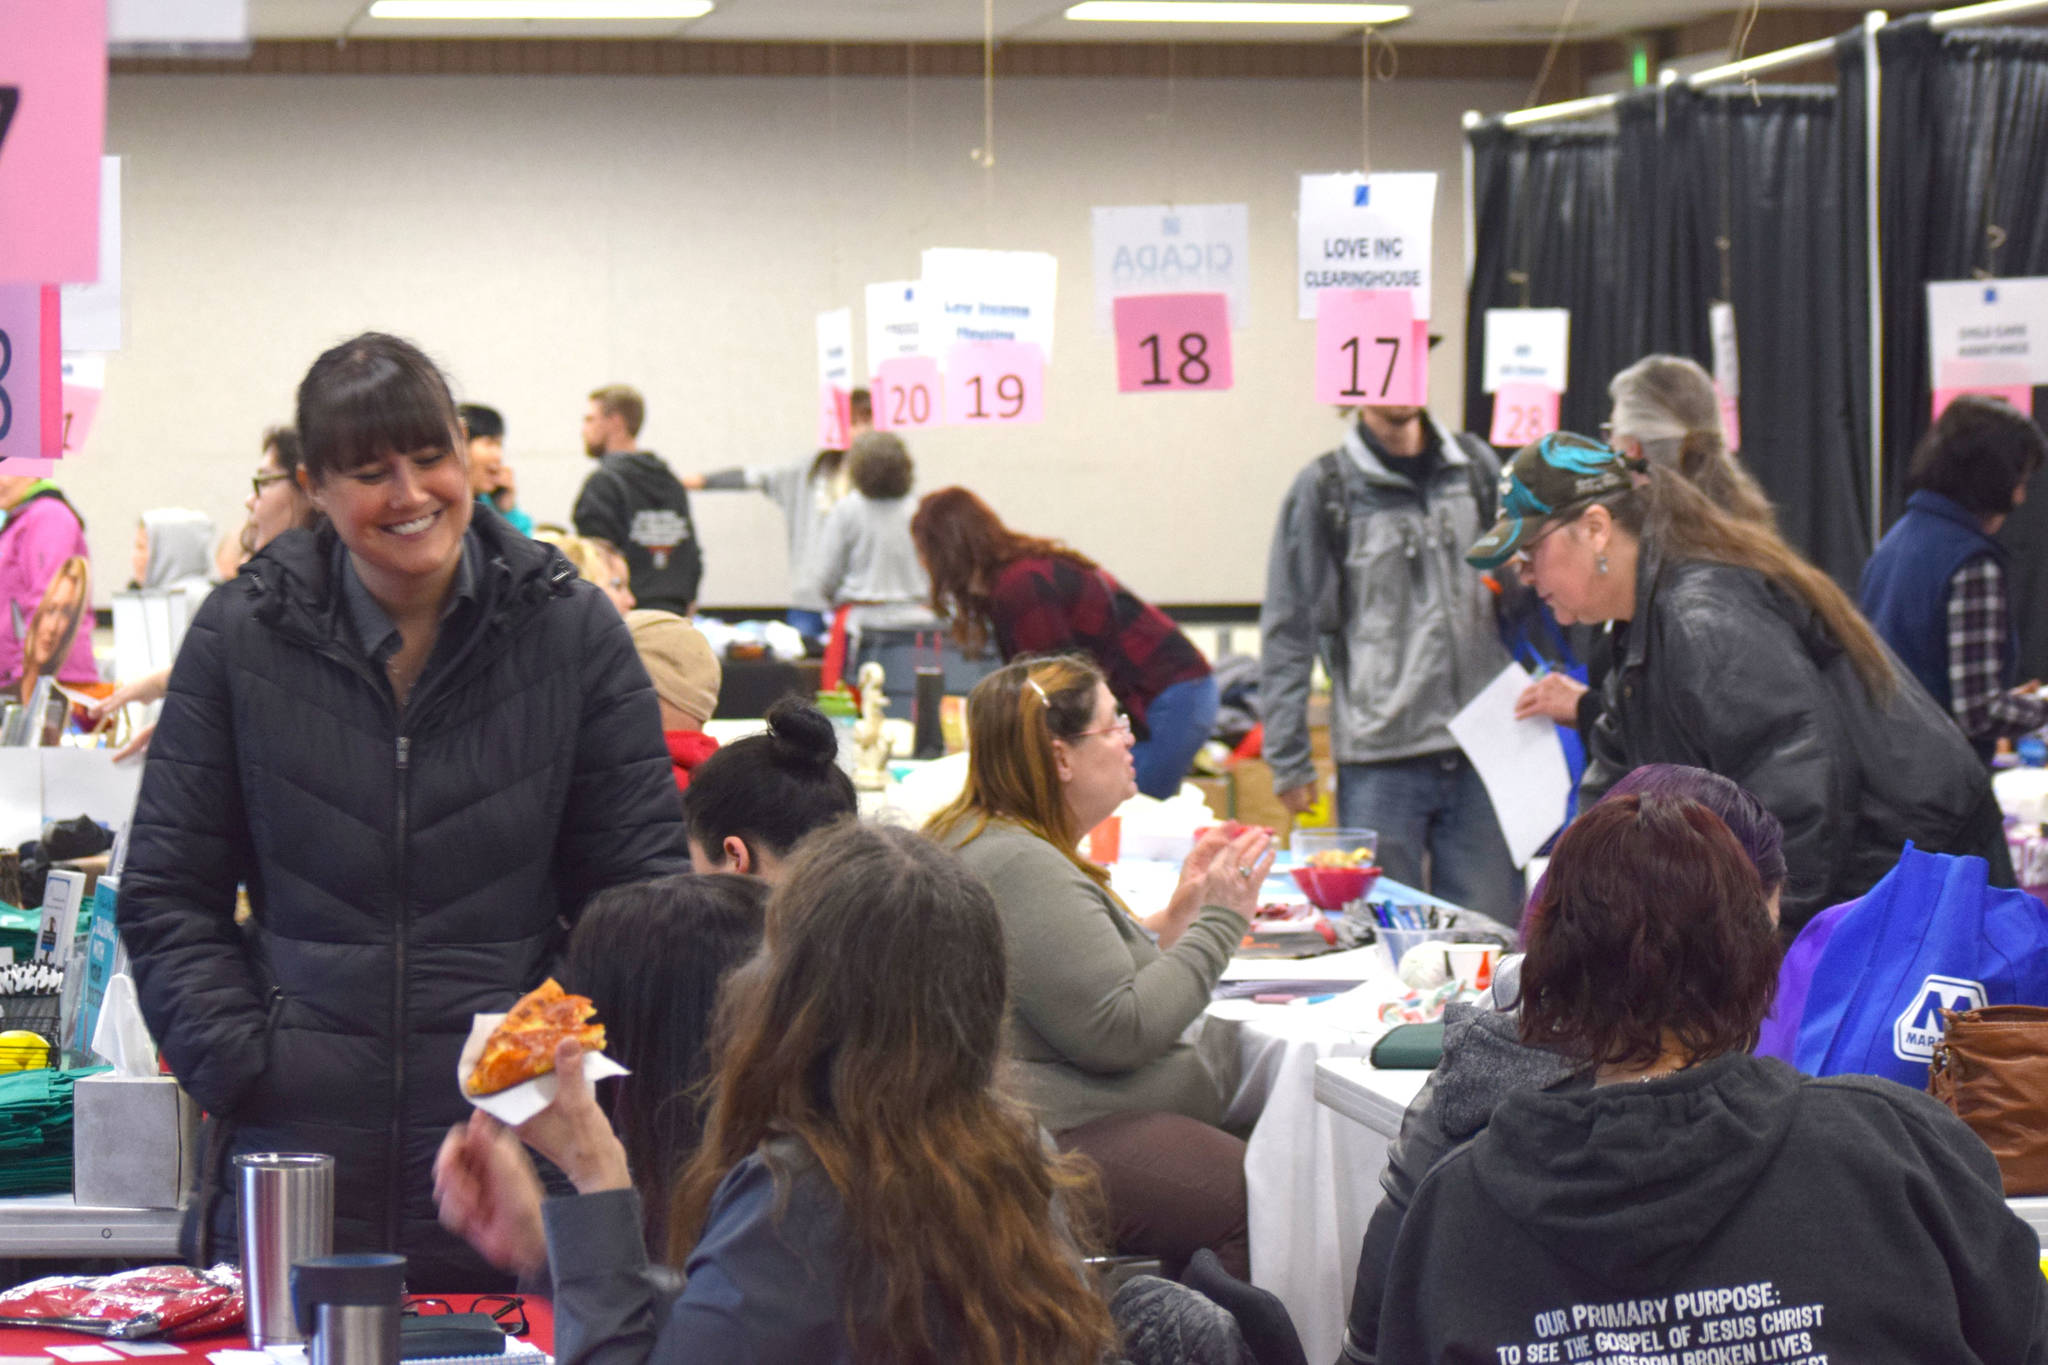 Peninsula residents browse the services available during the 2019 Project Homeless Connect at the Soldotna Regional Sports Complex on Jan. 23, 2019. (Photo by Brian Mazurek/Peninsula Clarion)